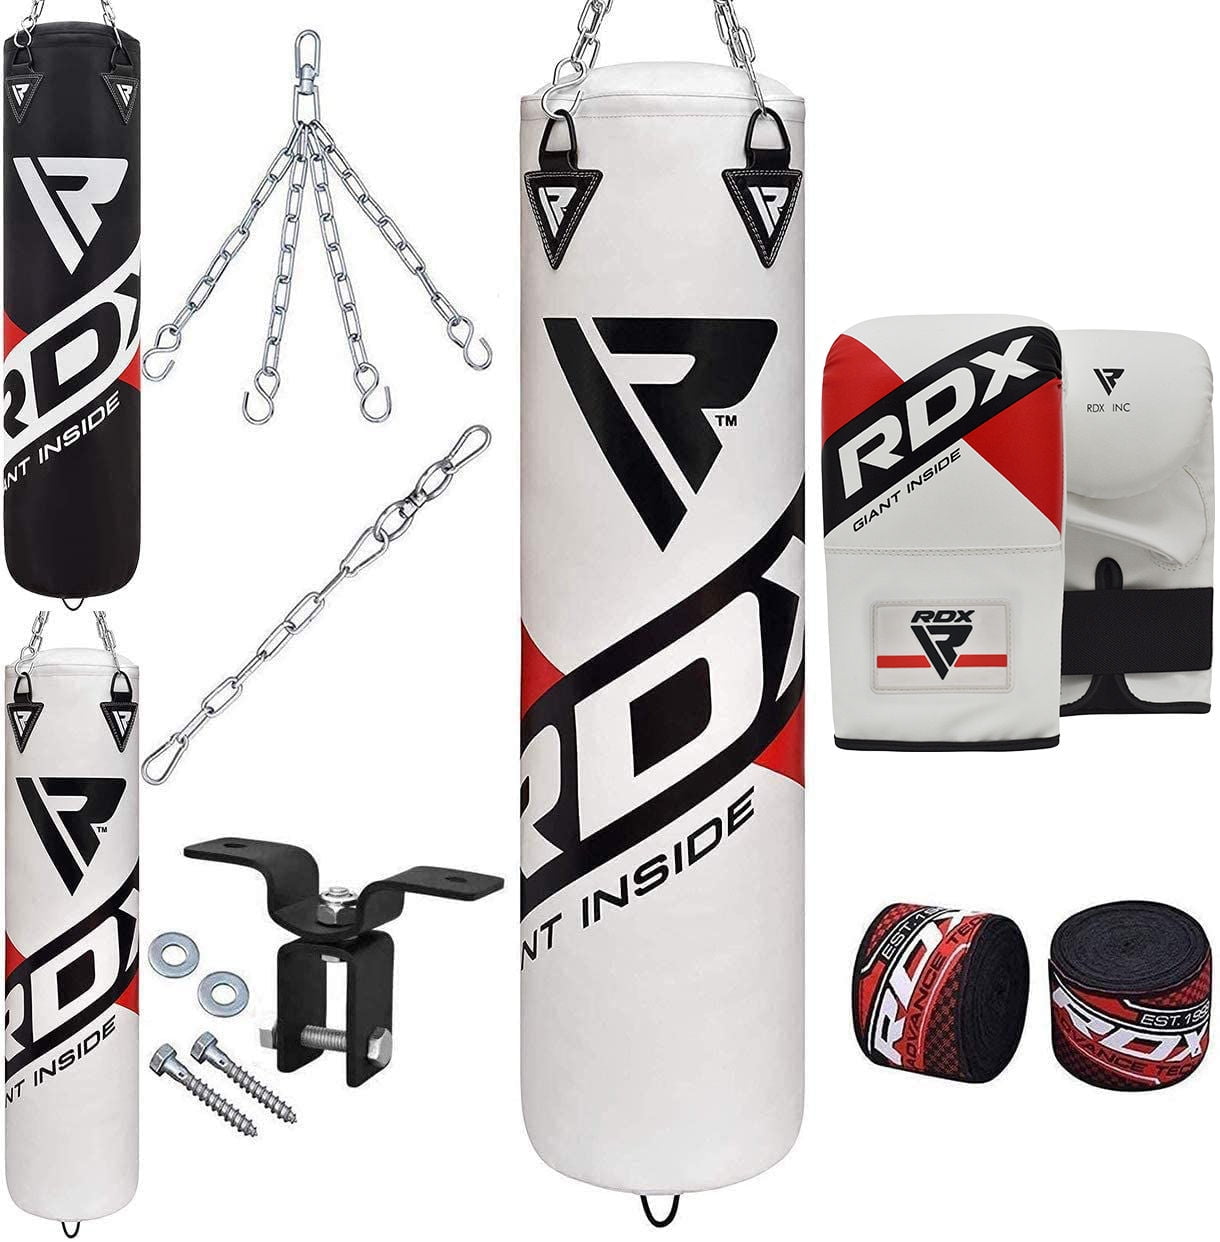 5FT UNFILLED PUNCHING BAG MMA KICK BOXING EXERCISE PUNCHING SPARRING MARTIAL ART 